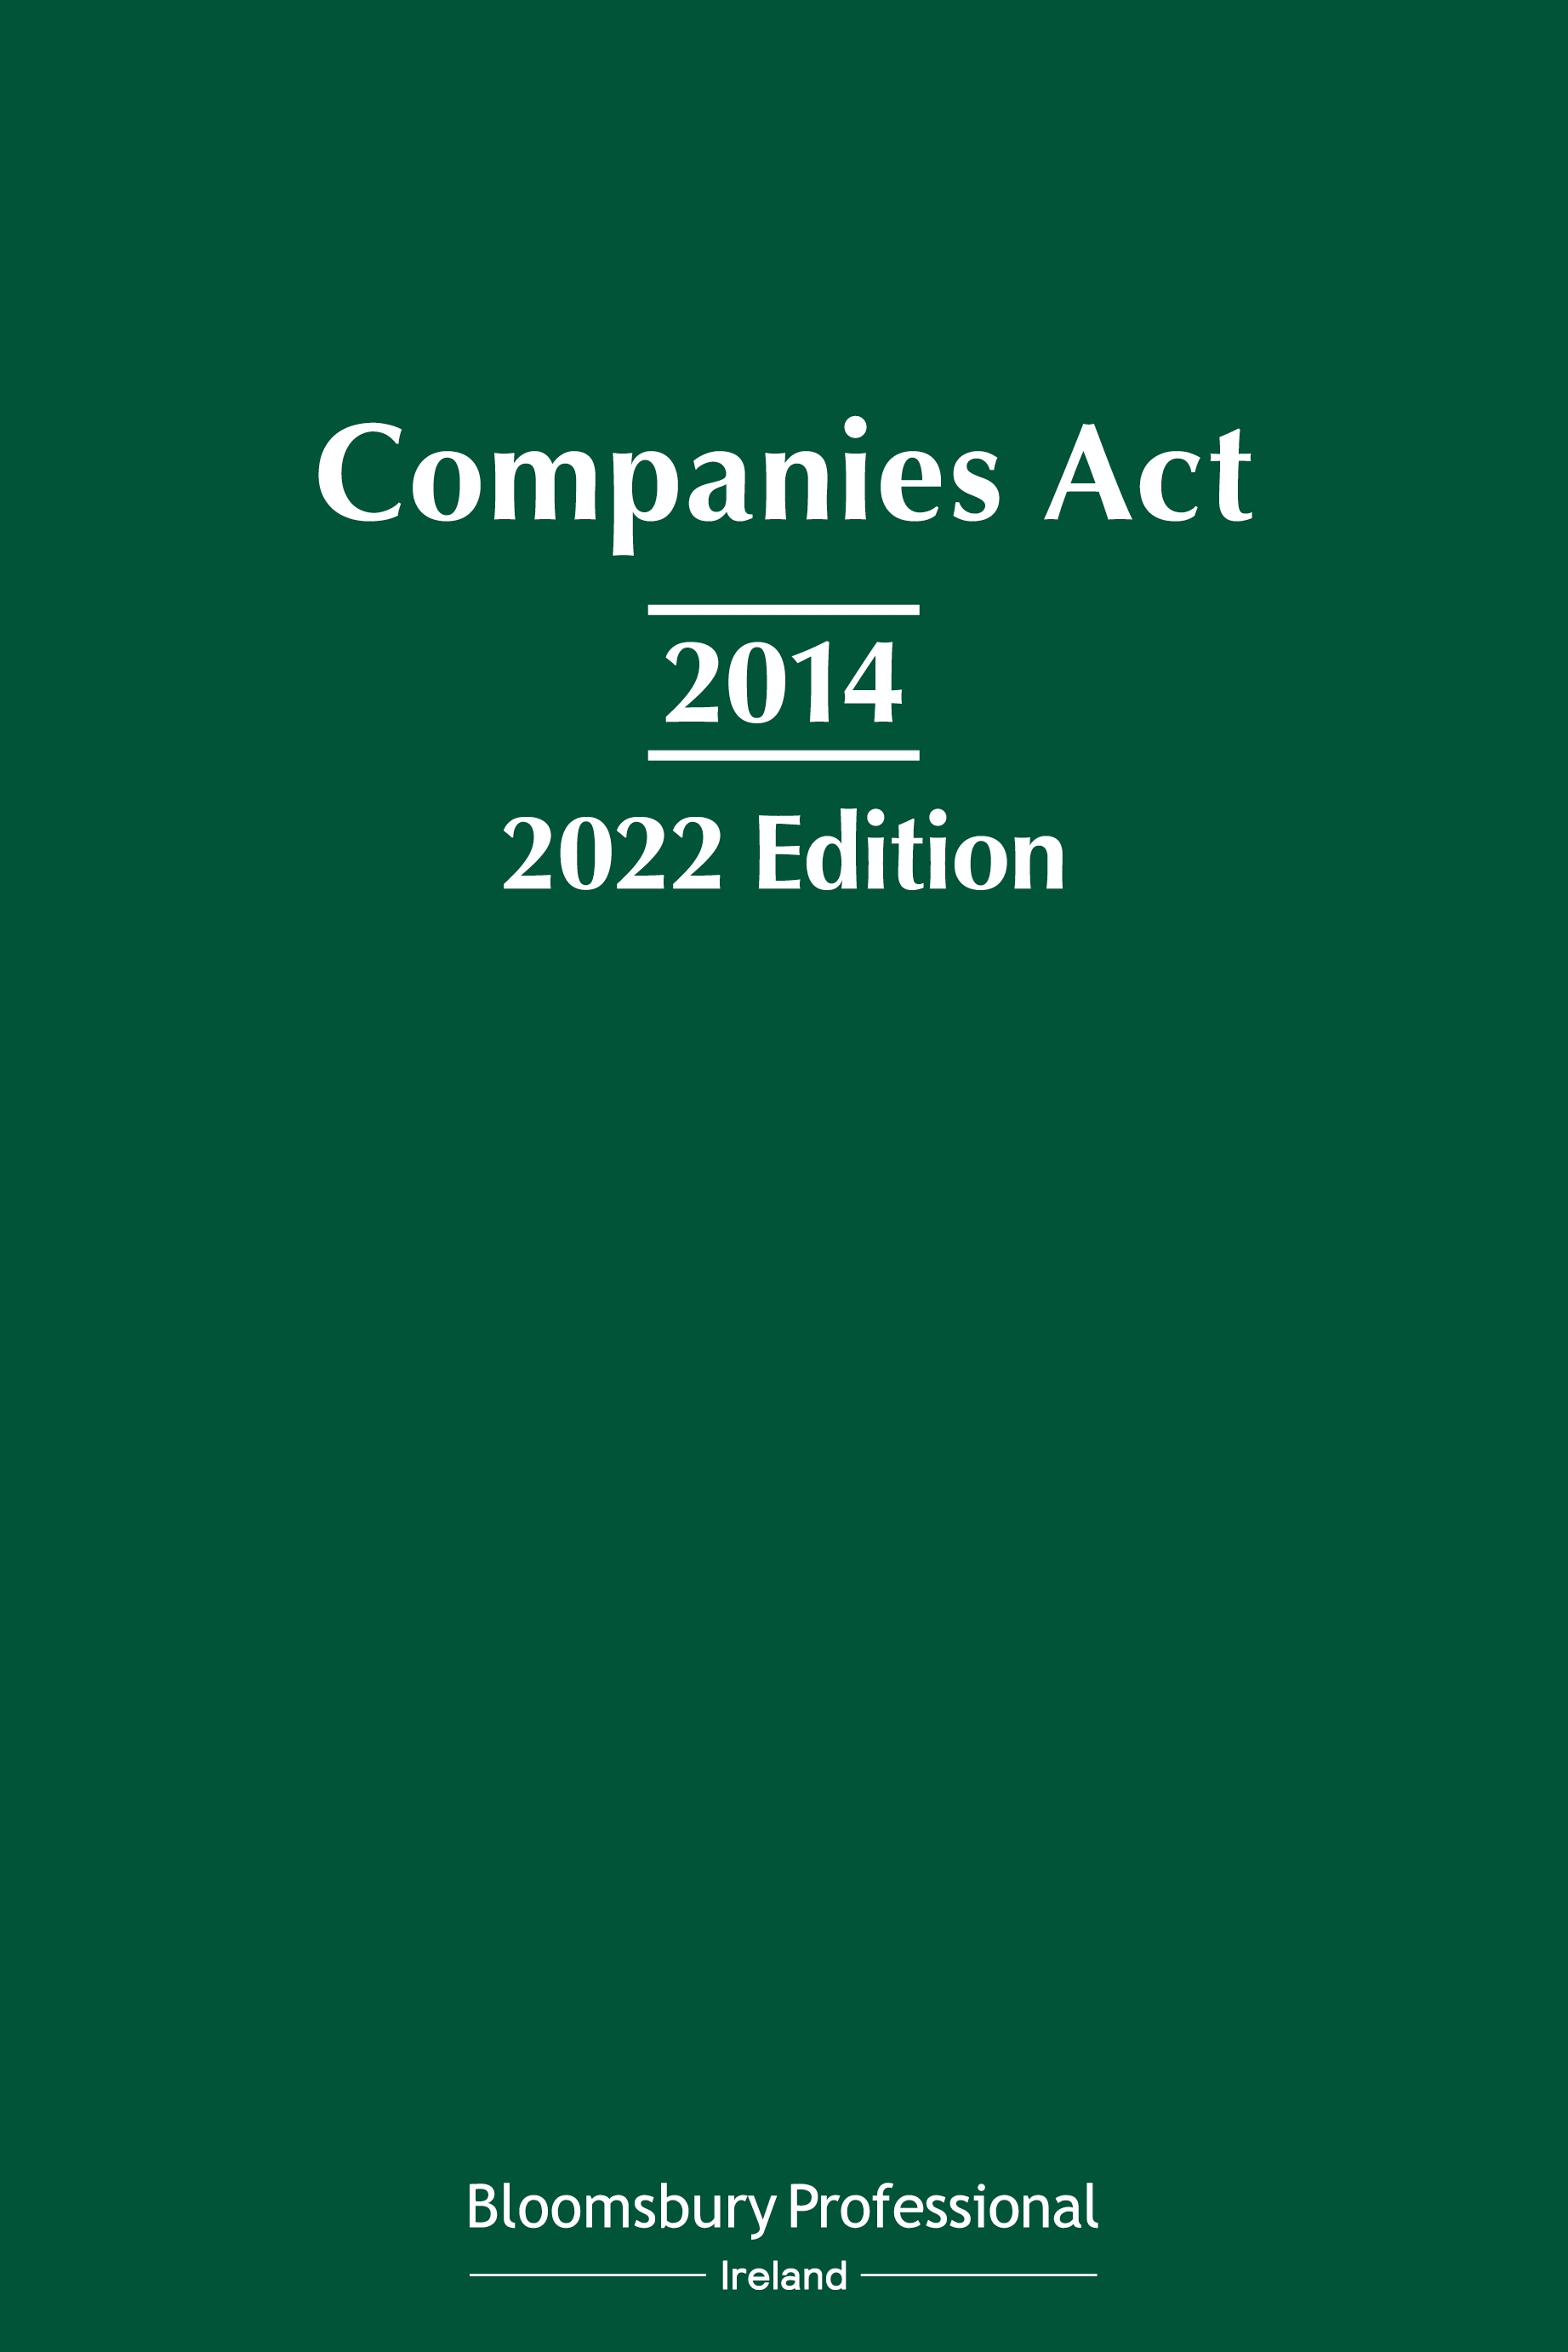 Companies Act 2014: 2022 Edition book jacket